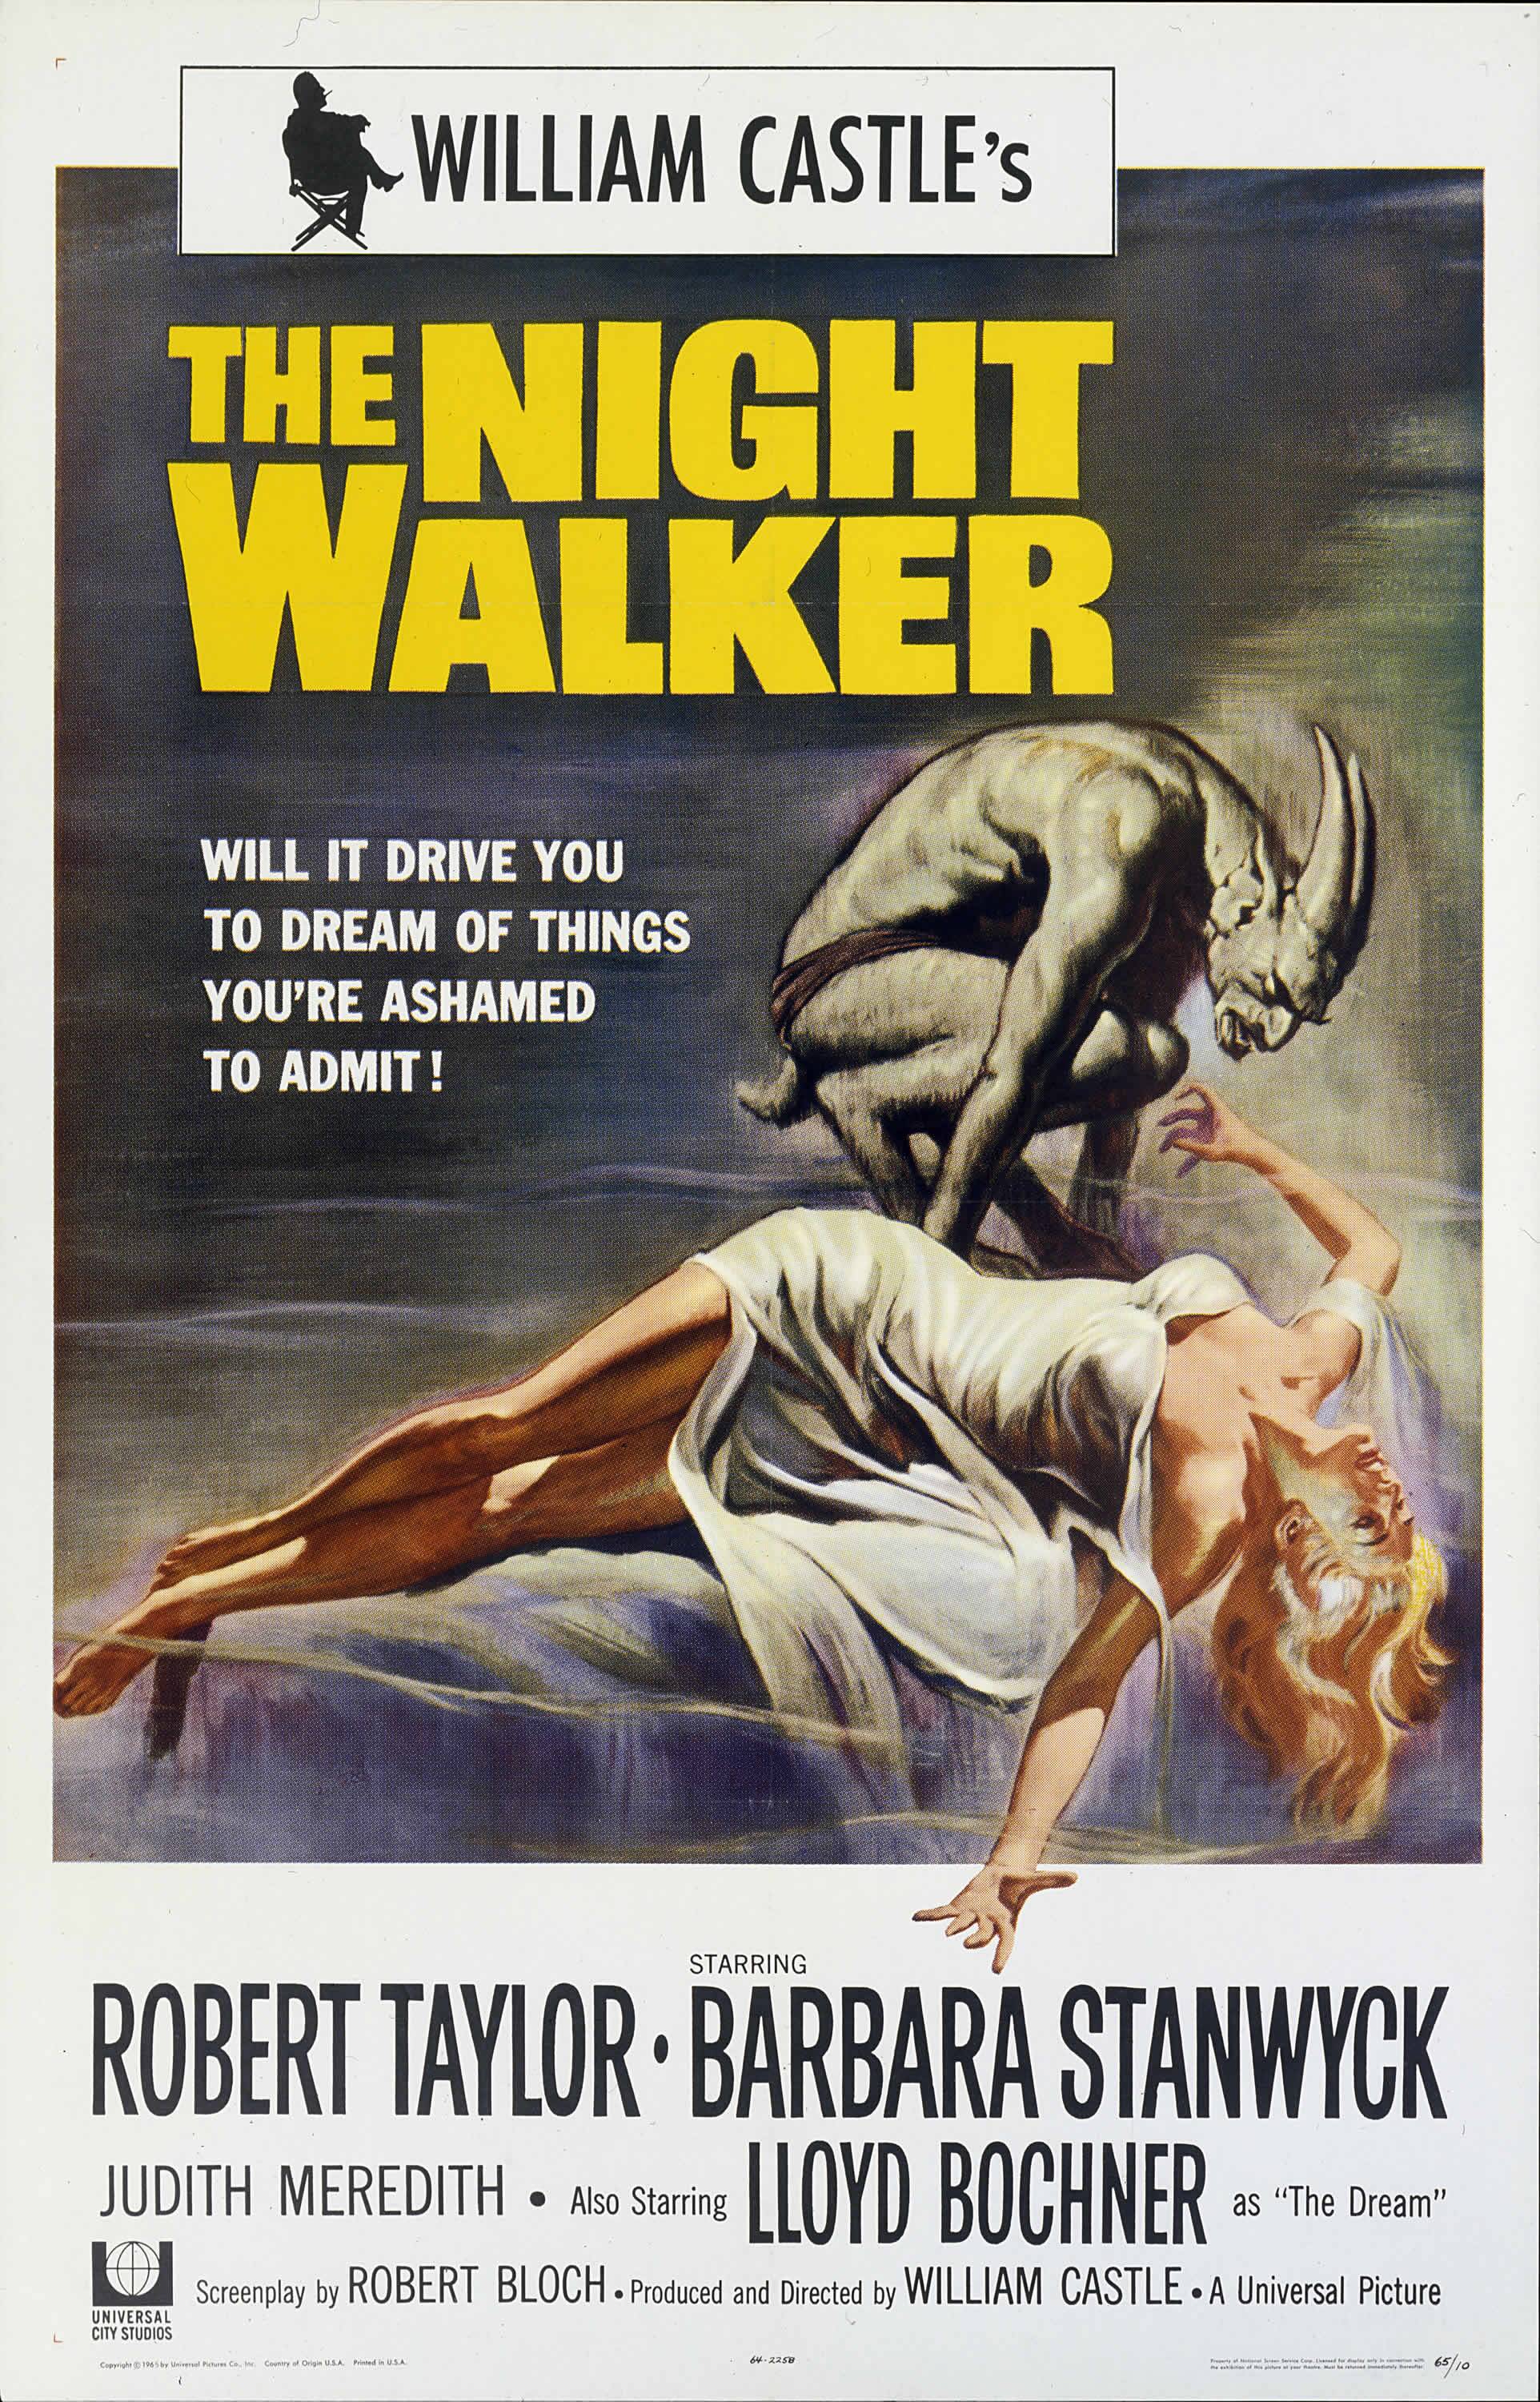 theatrical one-sheet artwork